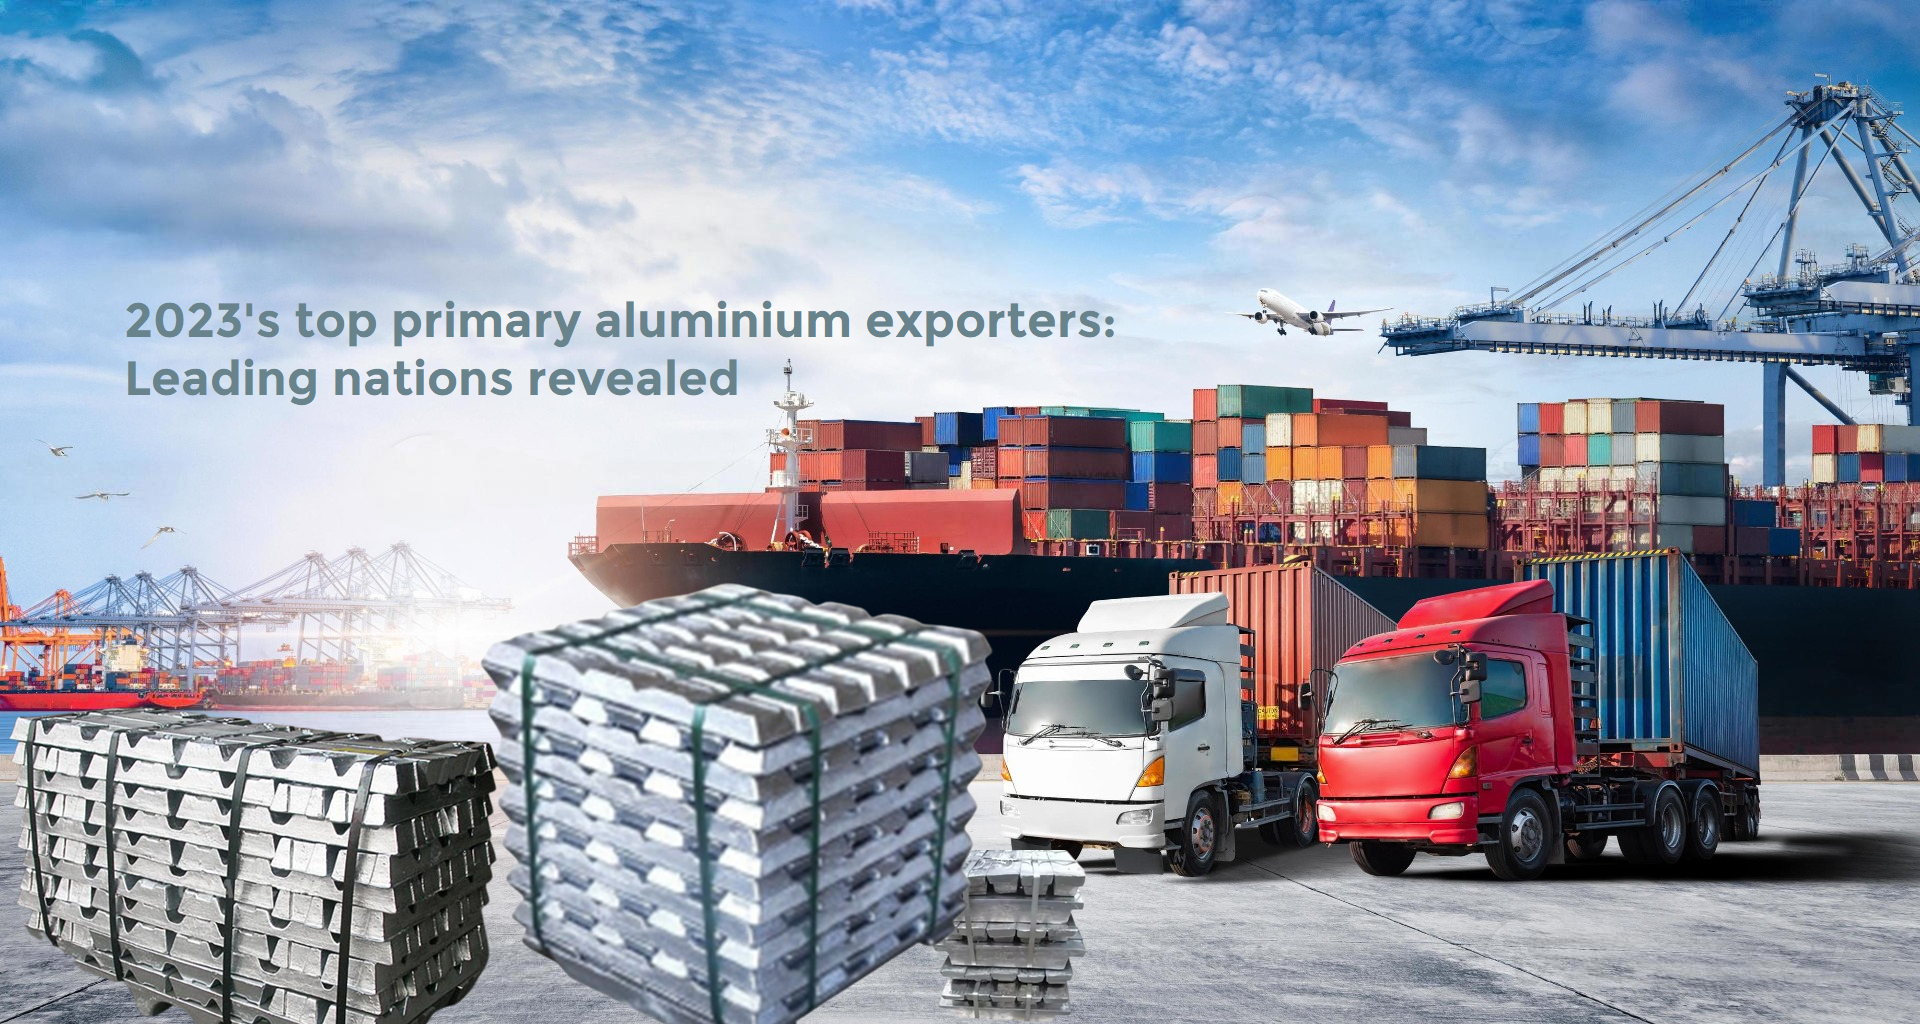 World’s top 5 primary aluminium exporting countries in 2023